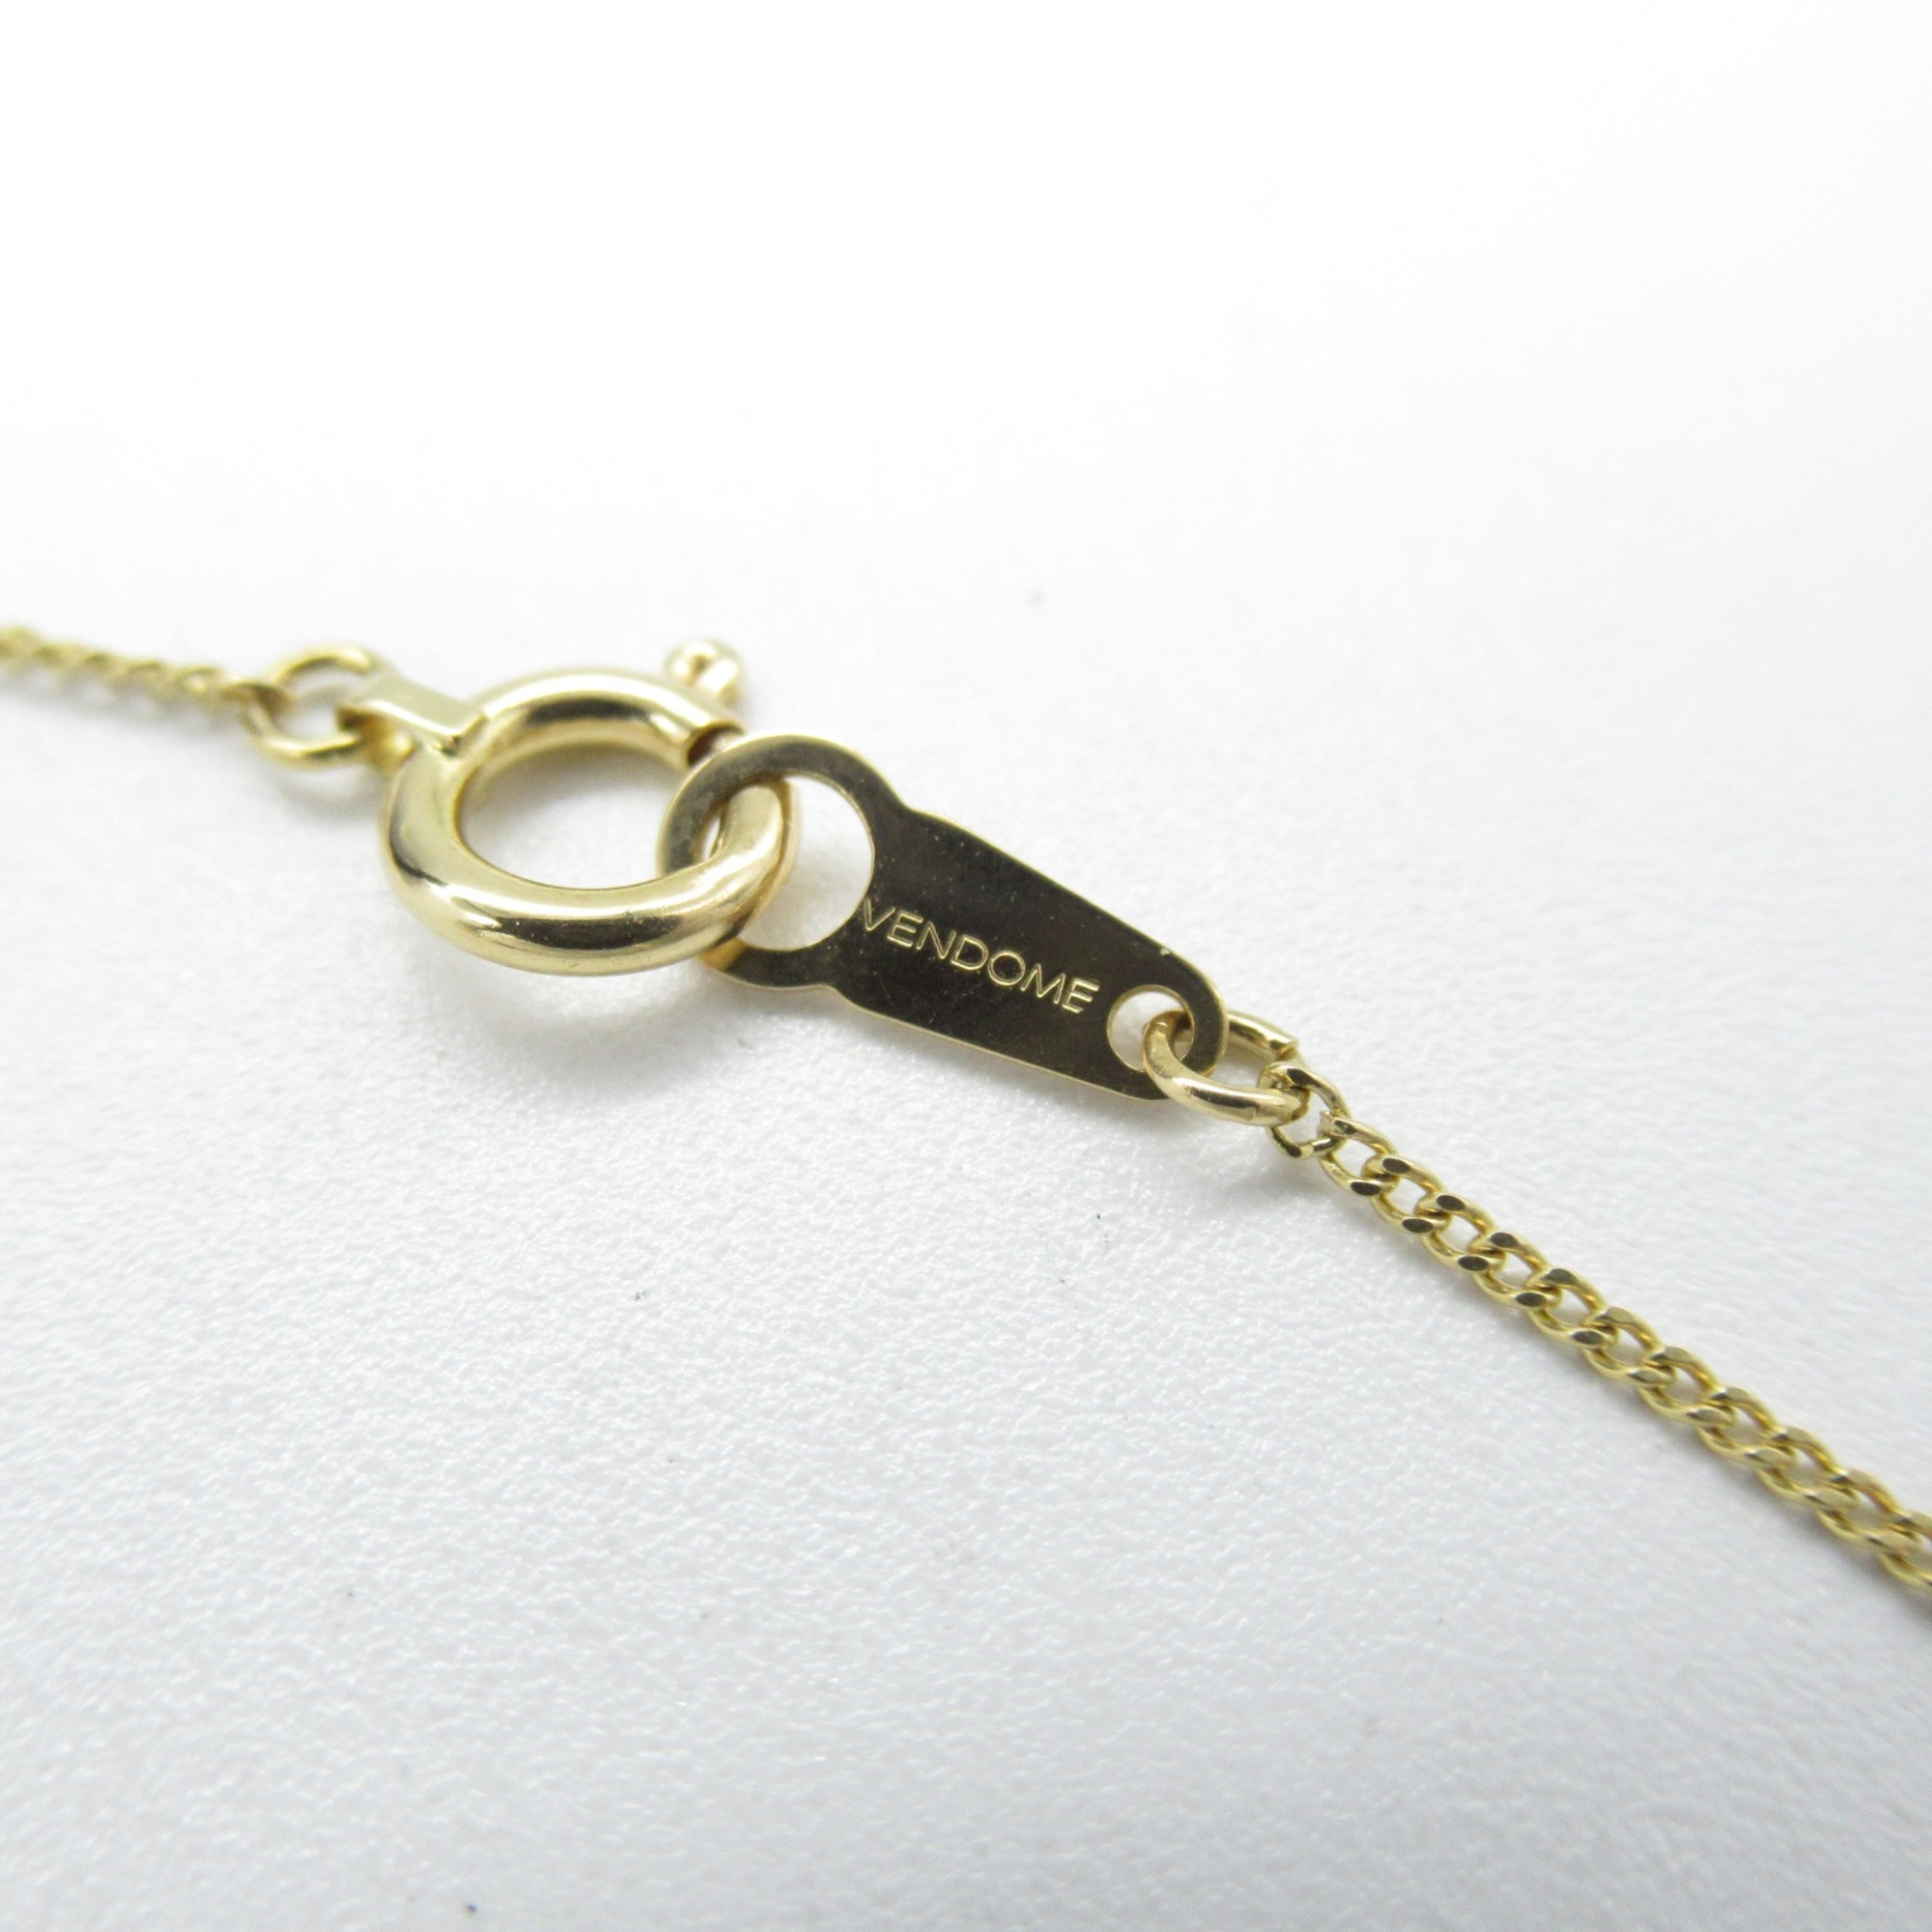 Vendome Aoyama Diamond Necklace Necklace Clear  K18 (Yellow Gold) Clear